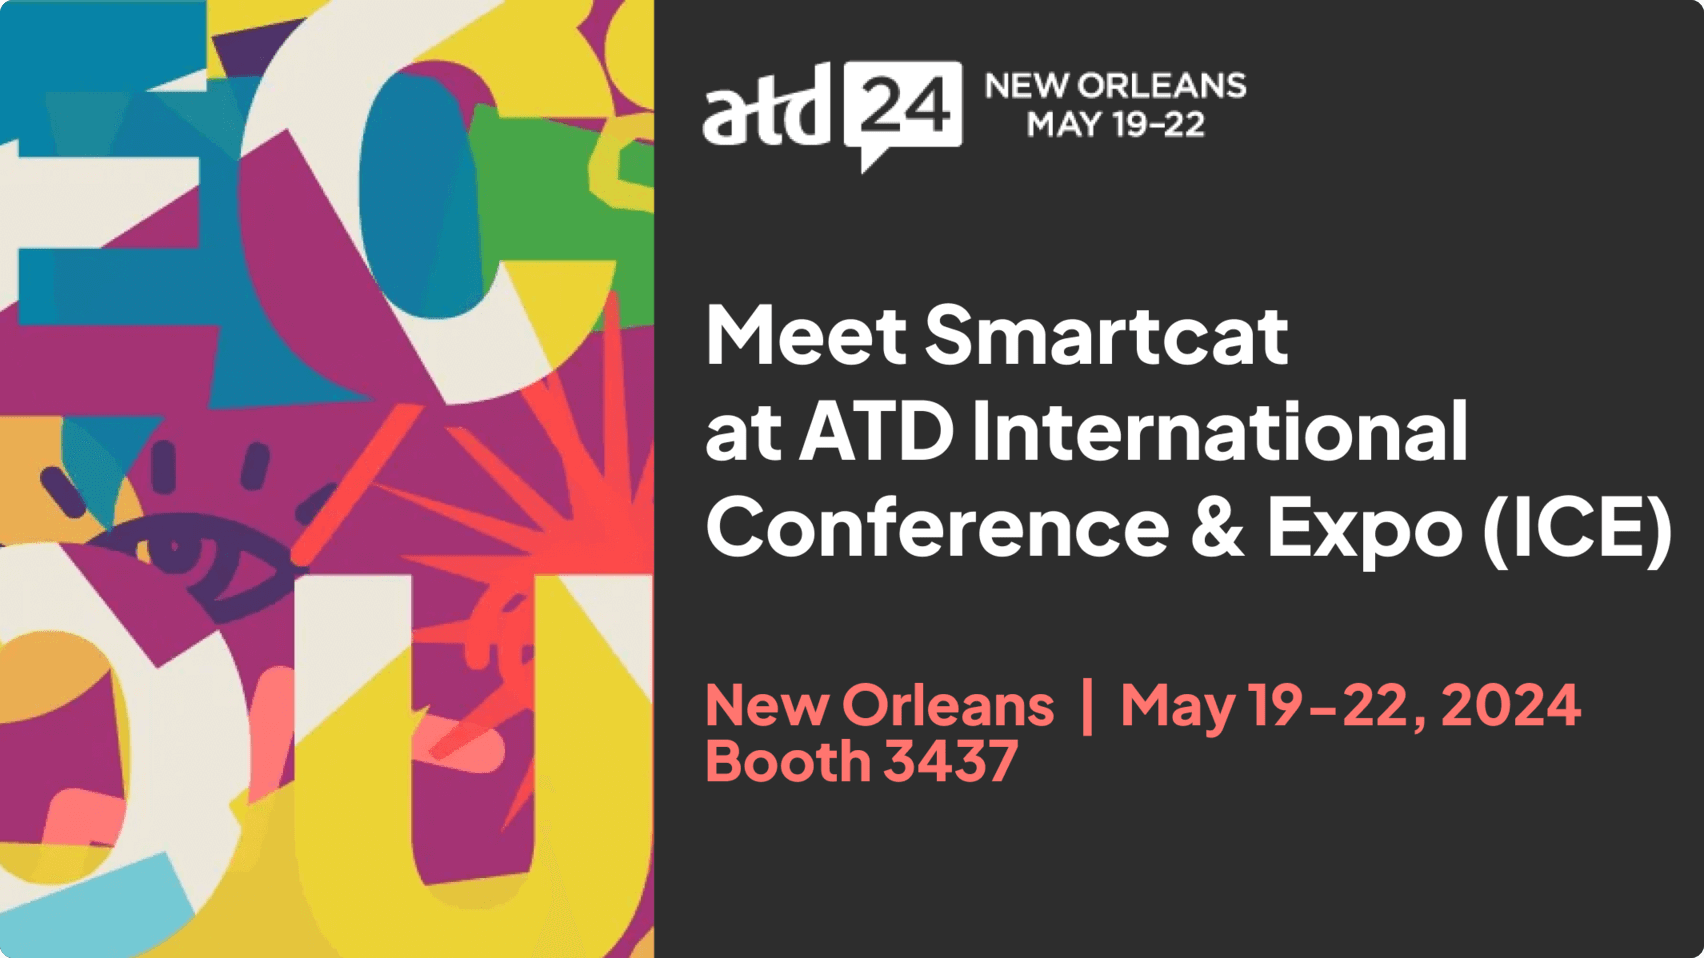 Meet Smartcat at ATD24 in New Orleans